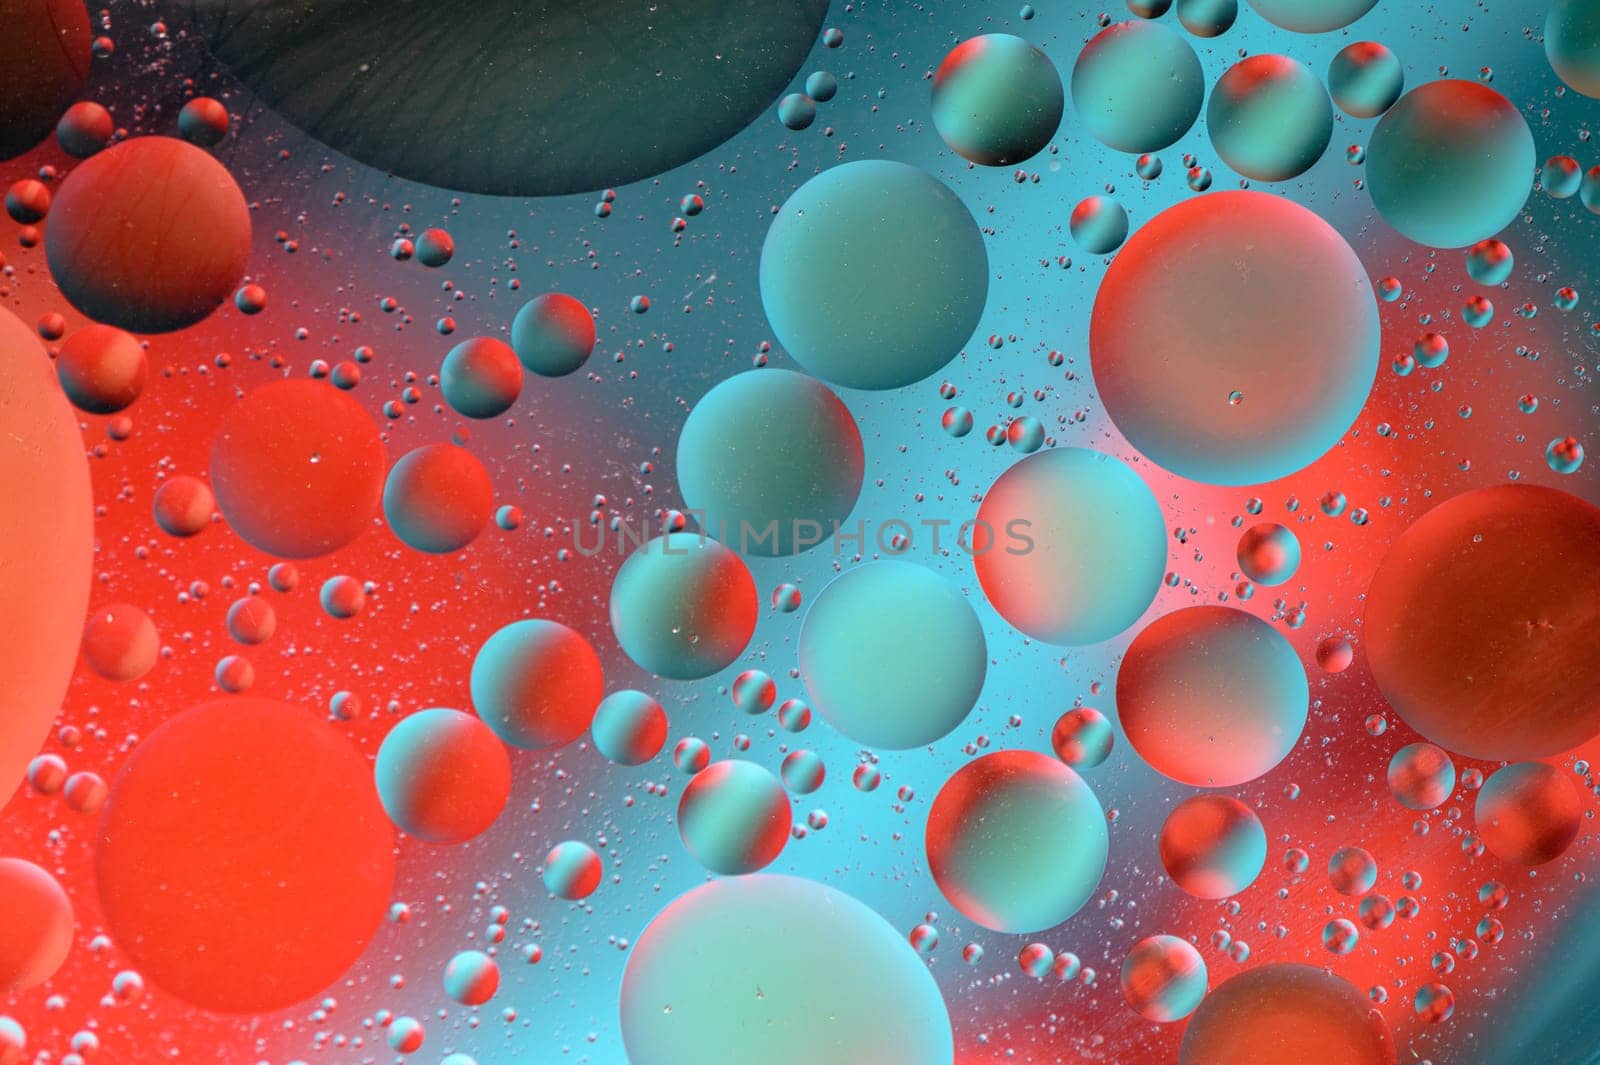 abstract background of multi-colored spots and circles microcosm universe galaxy 6 by Mixa74